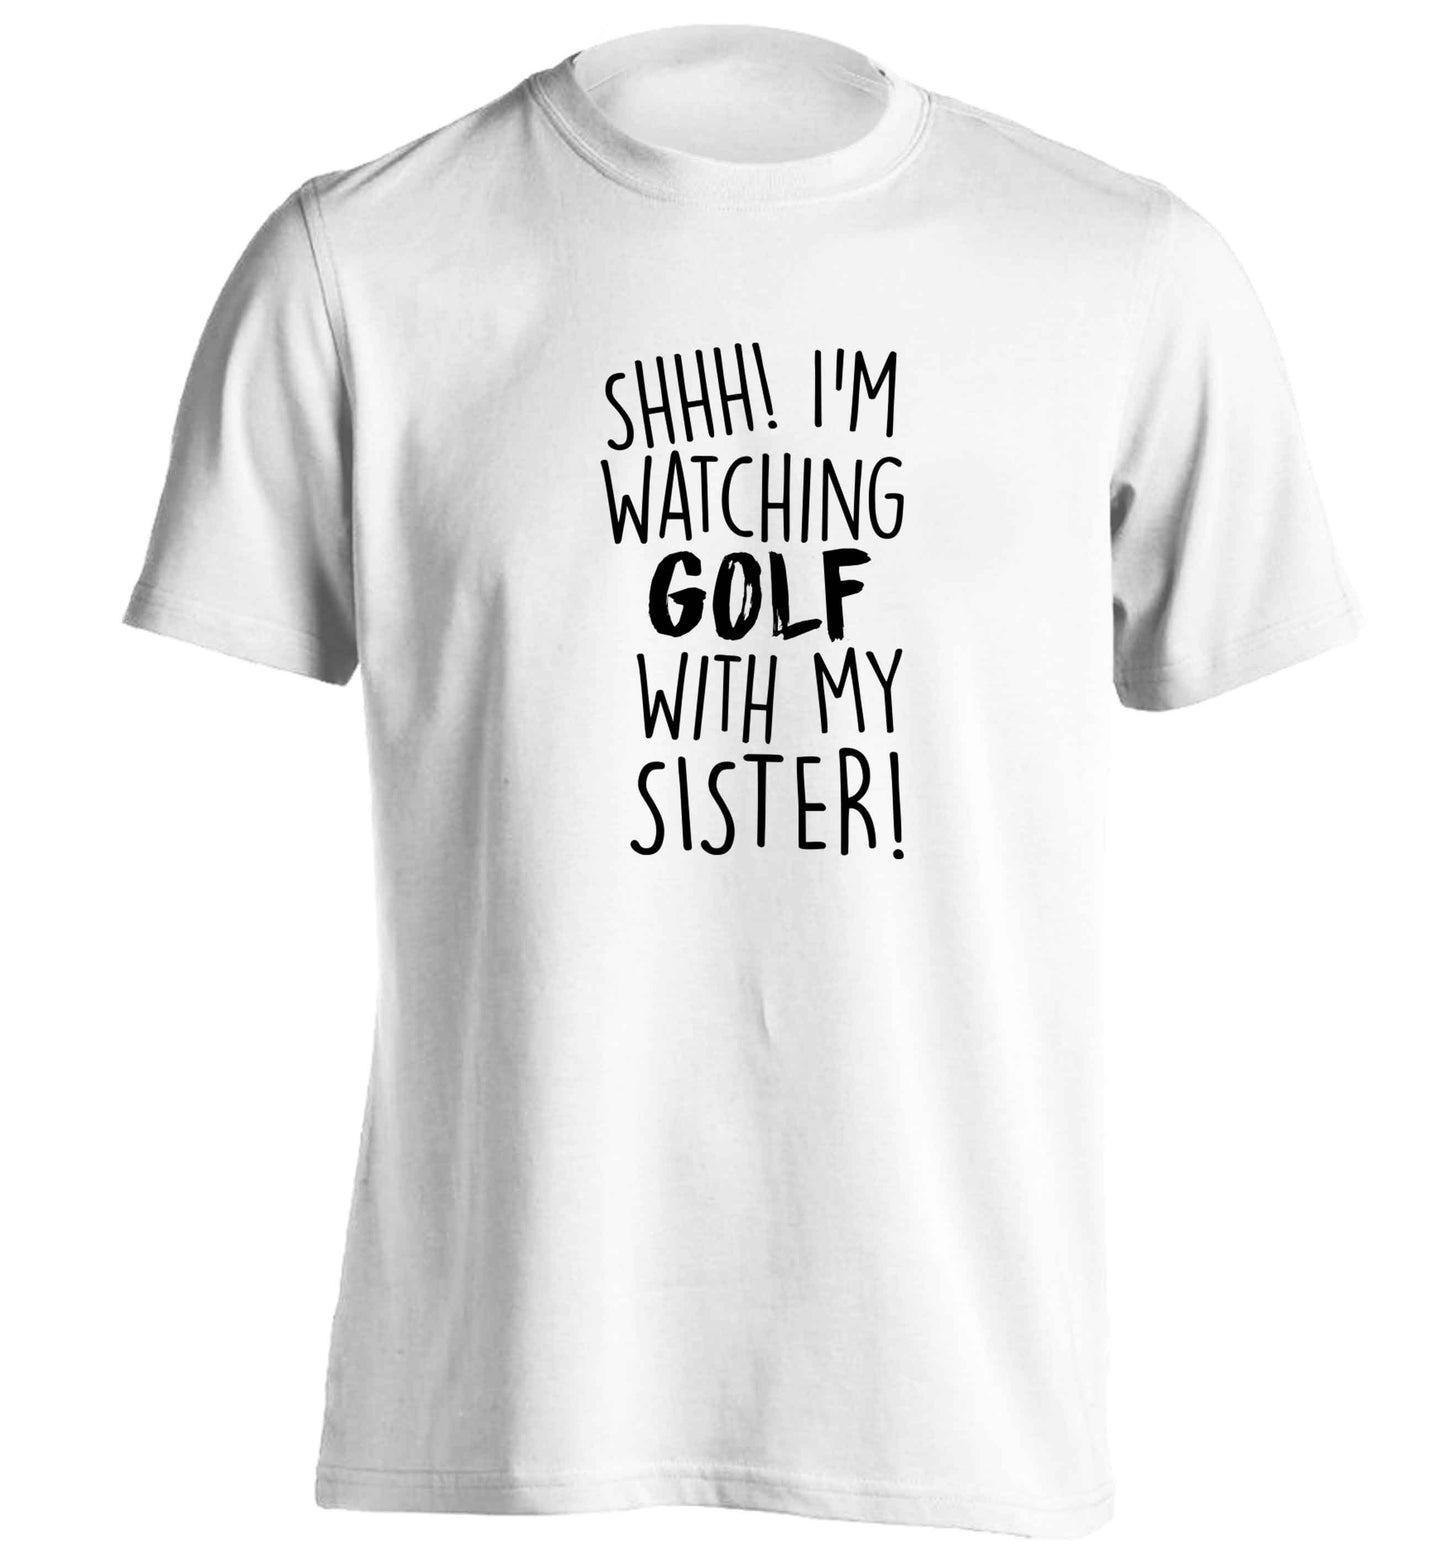 Shh I'm watching golf with my sister adults unisex white Tshirt 2XL